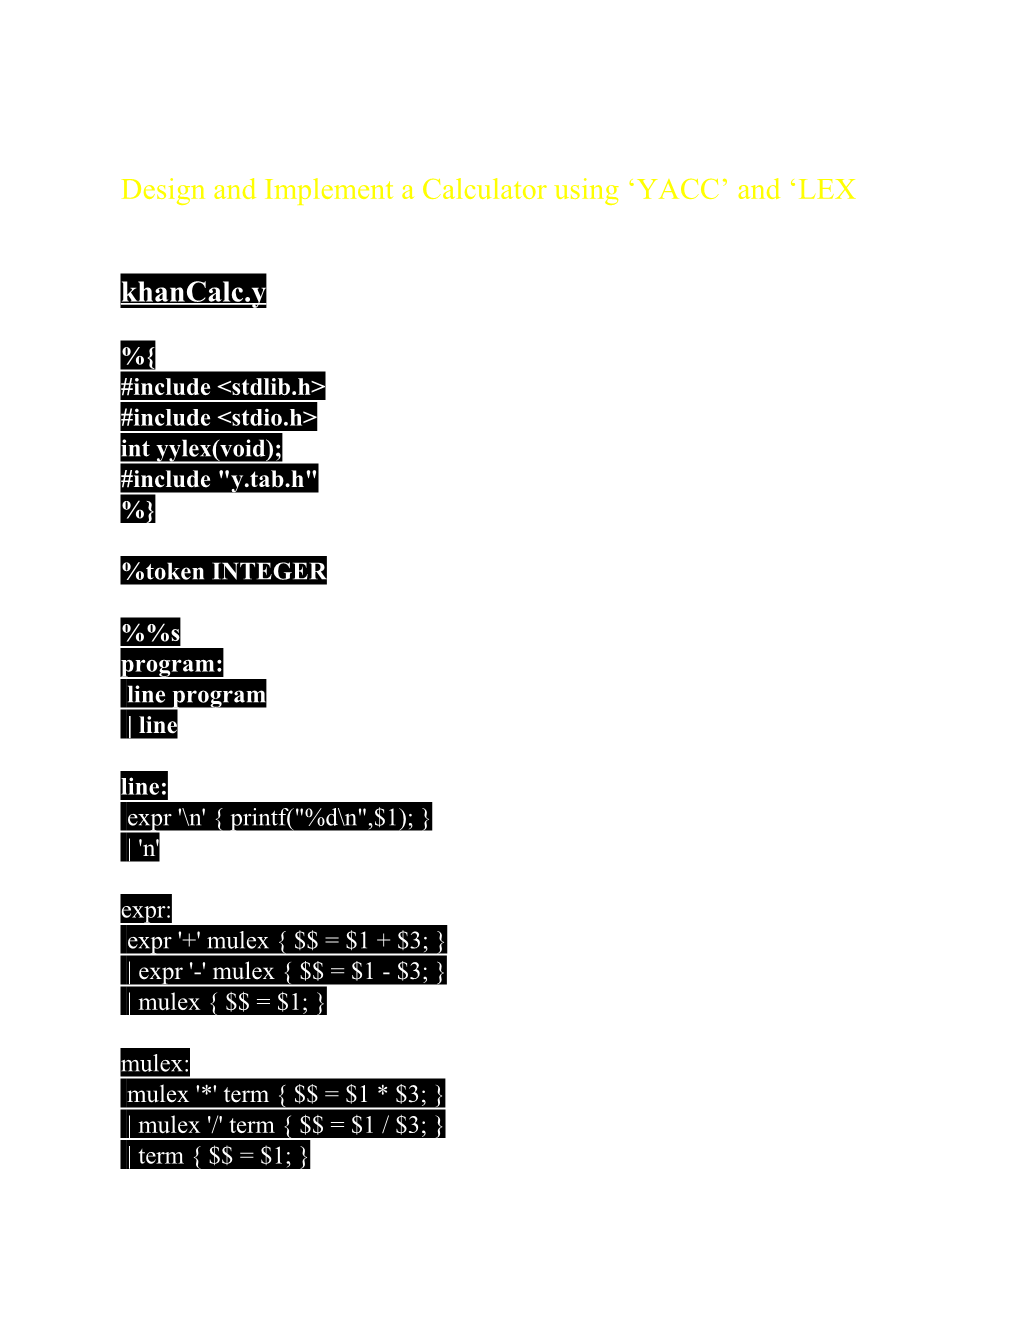 Design and Implement a Calculator Using YACC and LEX